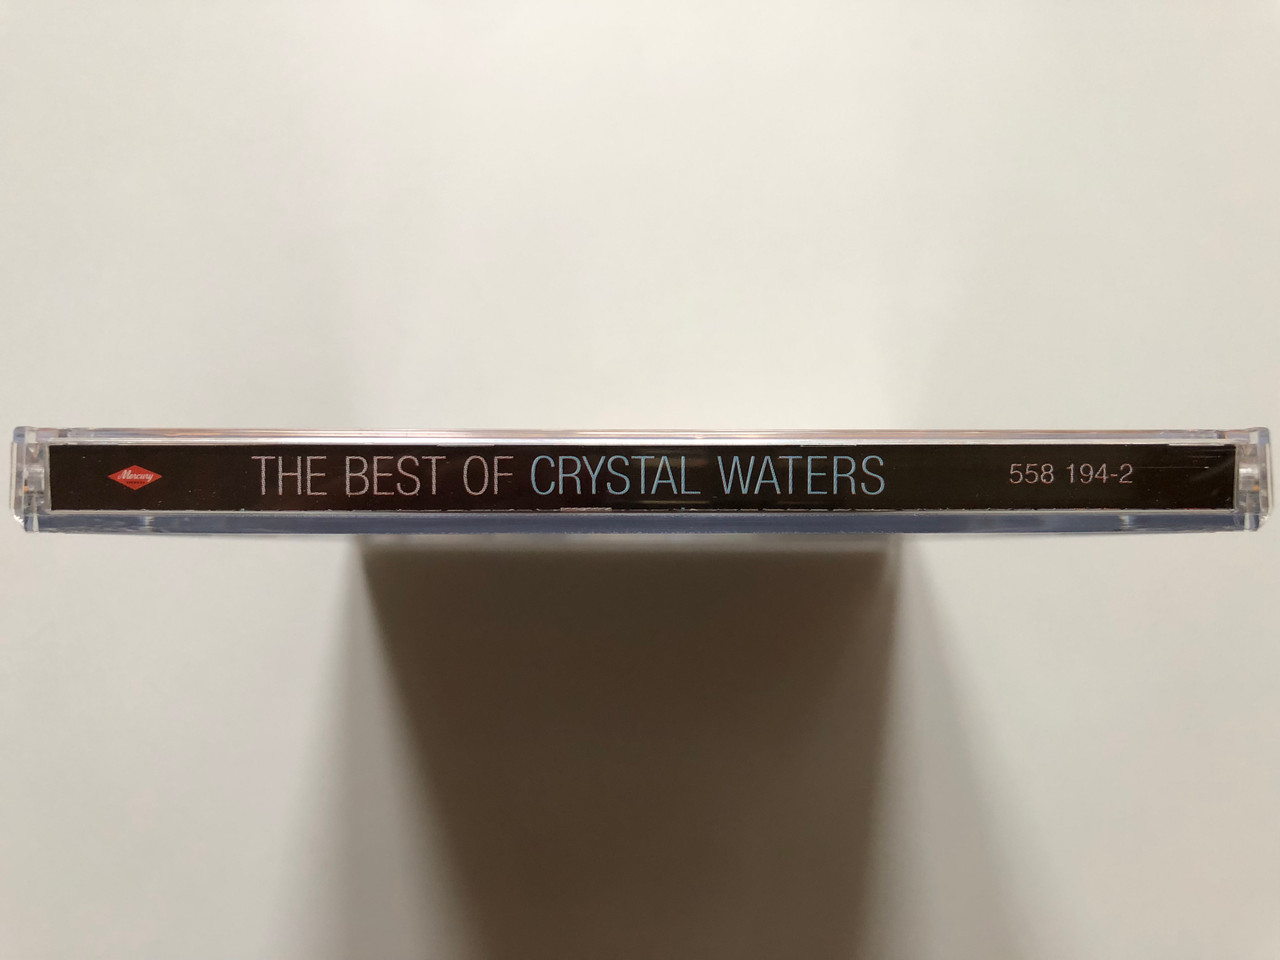 https://cdn10.bigcommerce.com/s-62bdpkt7pb/products/0/images/313274/The_Best_Of_Crystal_Waters_Mercury_Audio_CD_1998_558_194-2_3__62625.1700647469.1280.1280.JPG?c=2